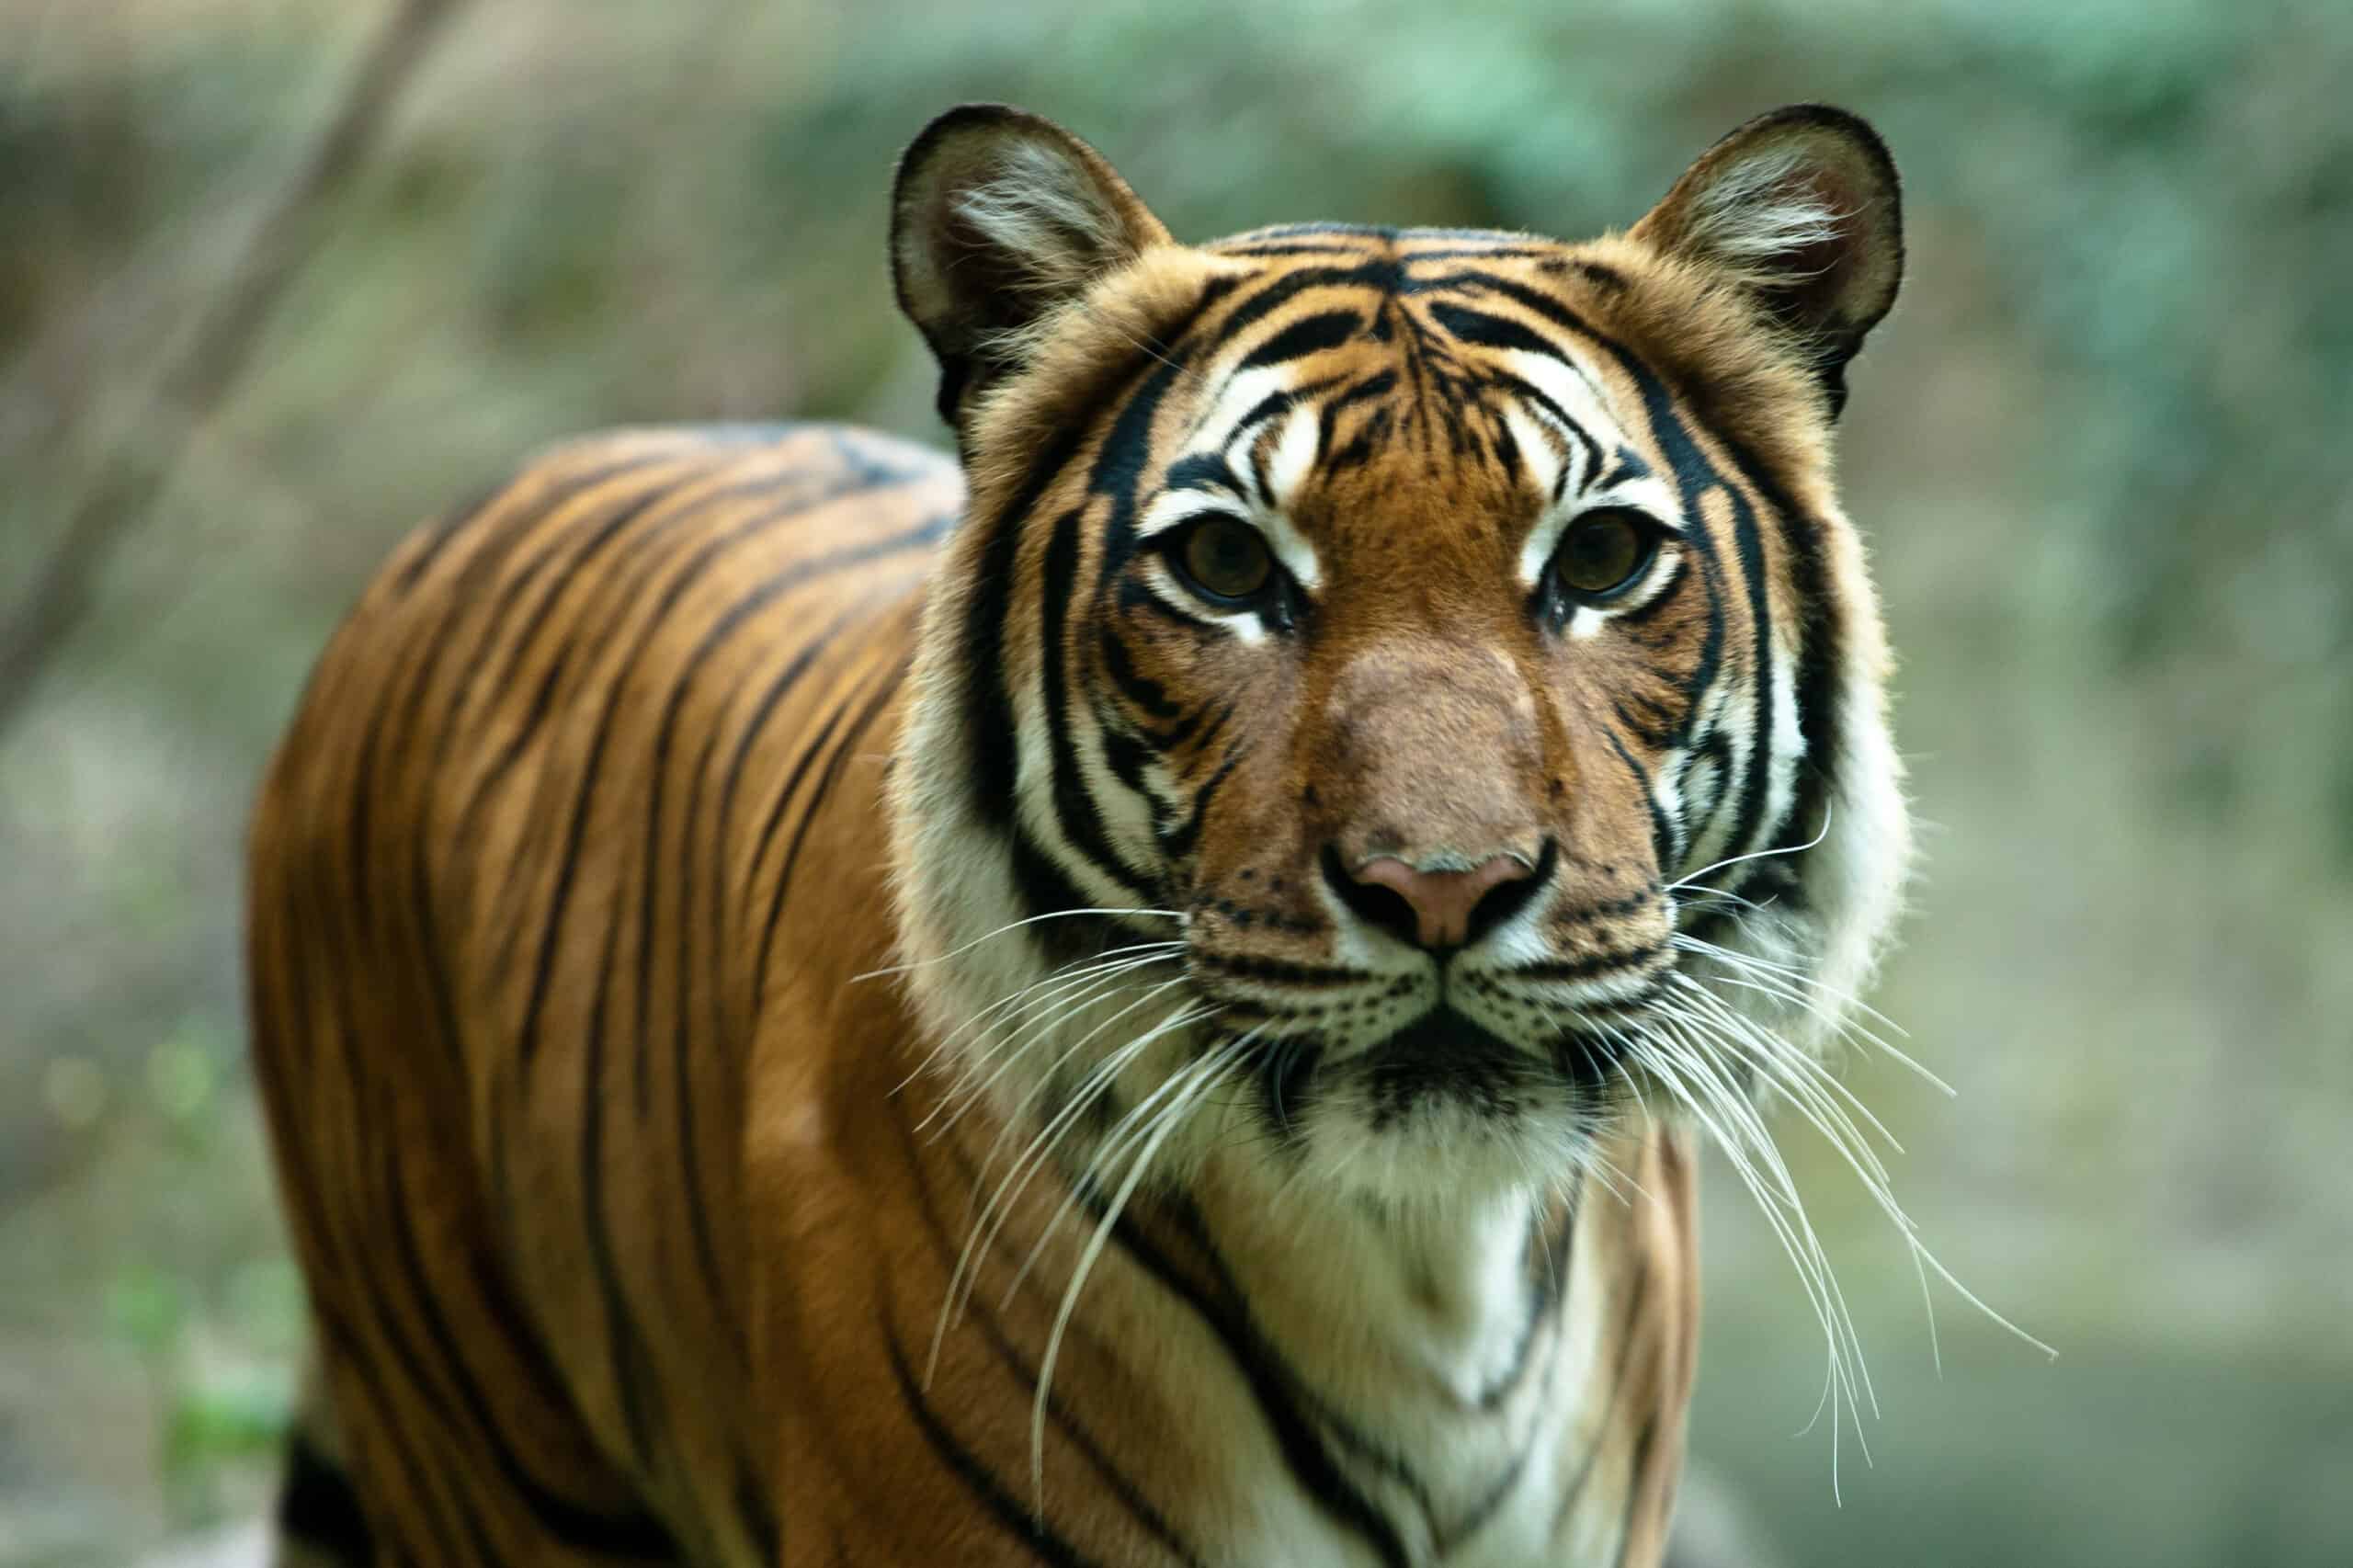 COVID lockdowns brought tigers closer to roads - The Wildlife Society